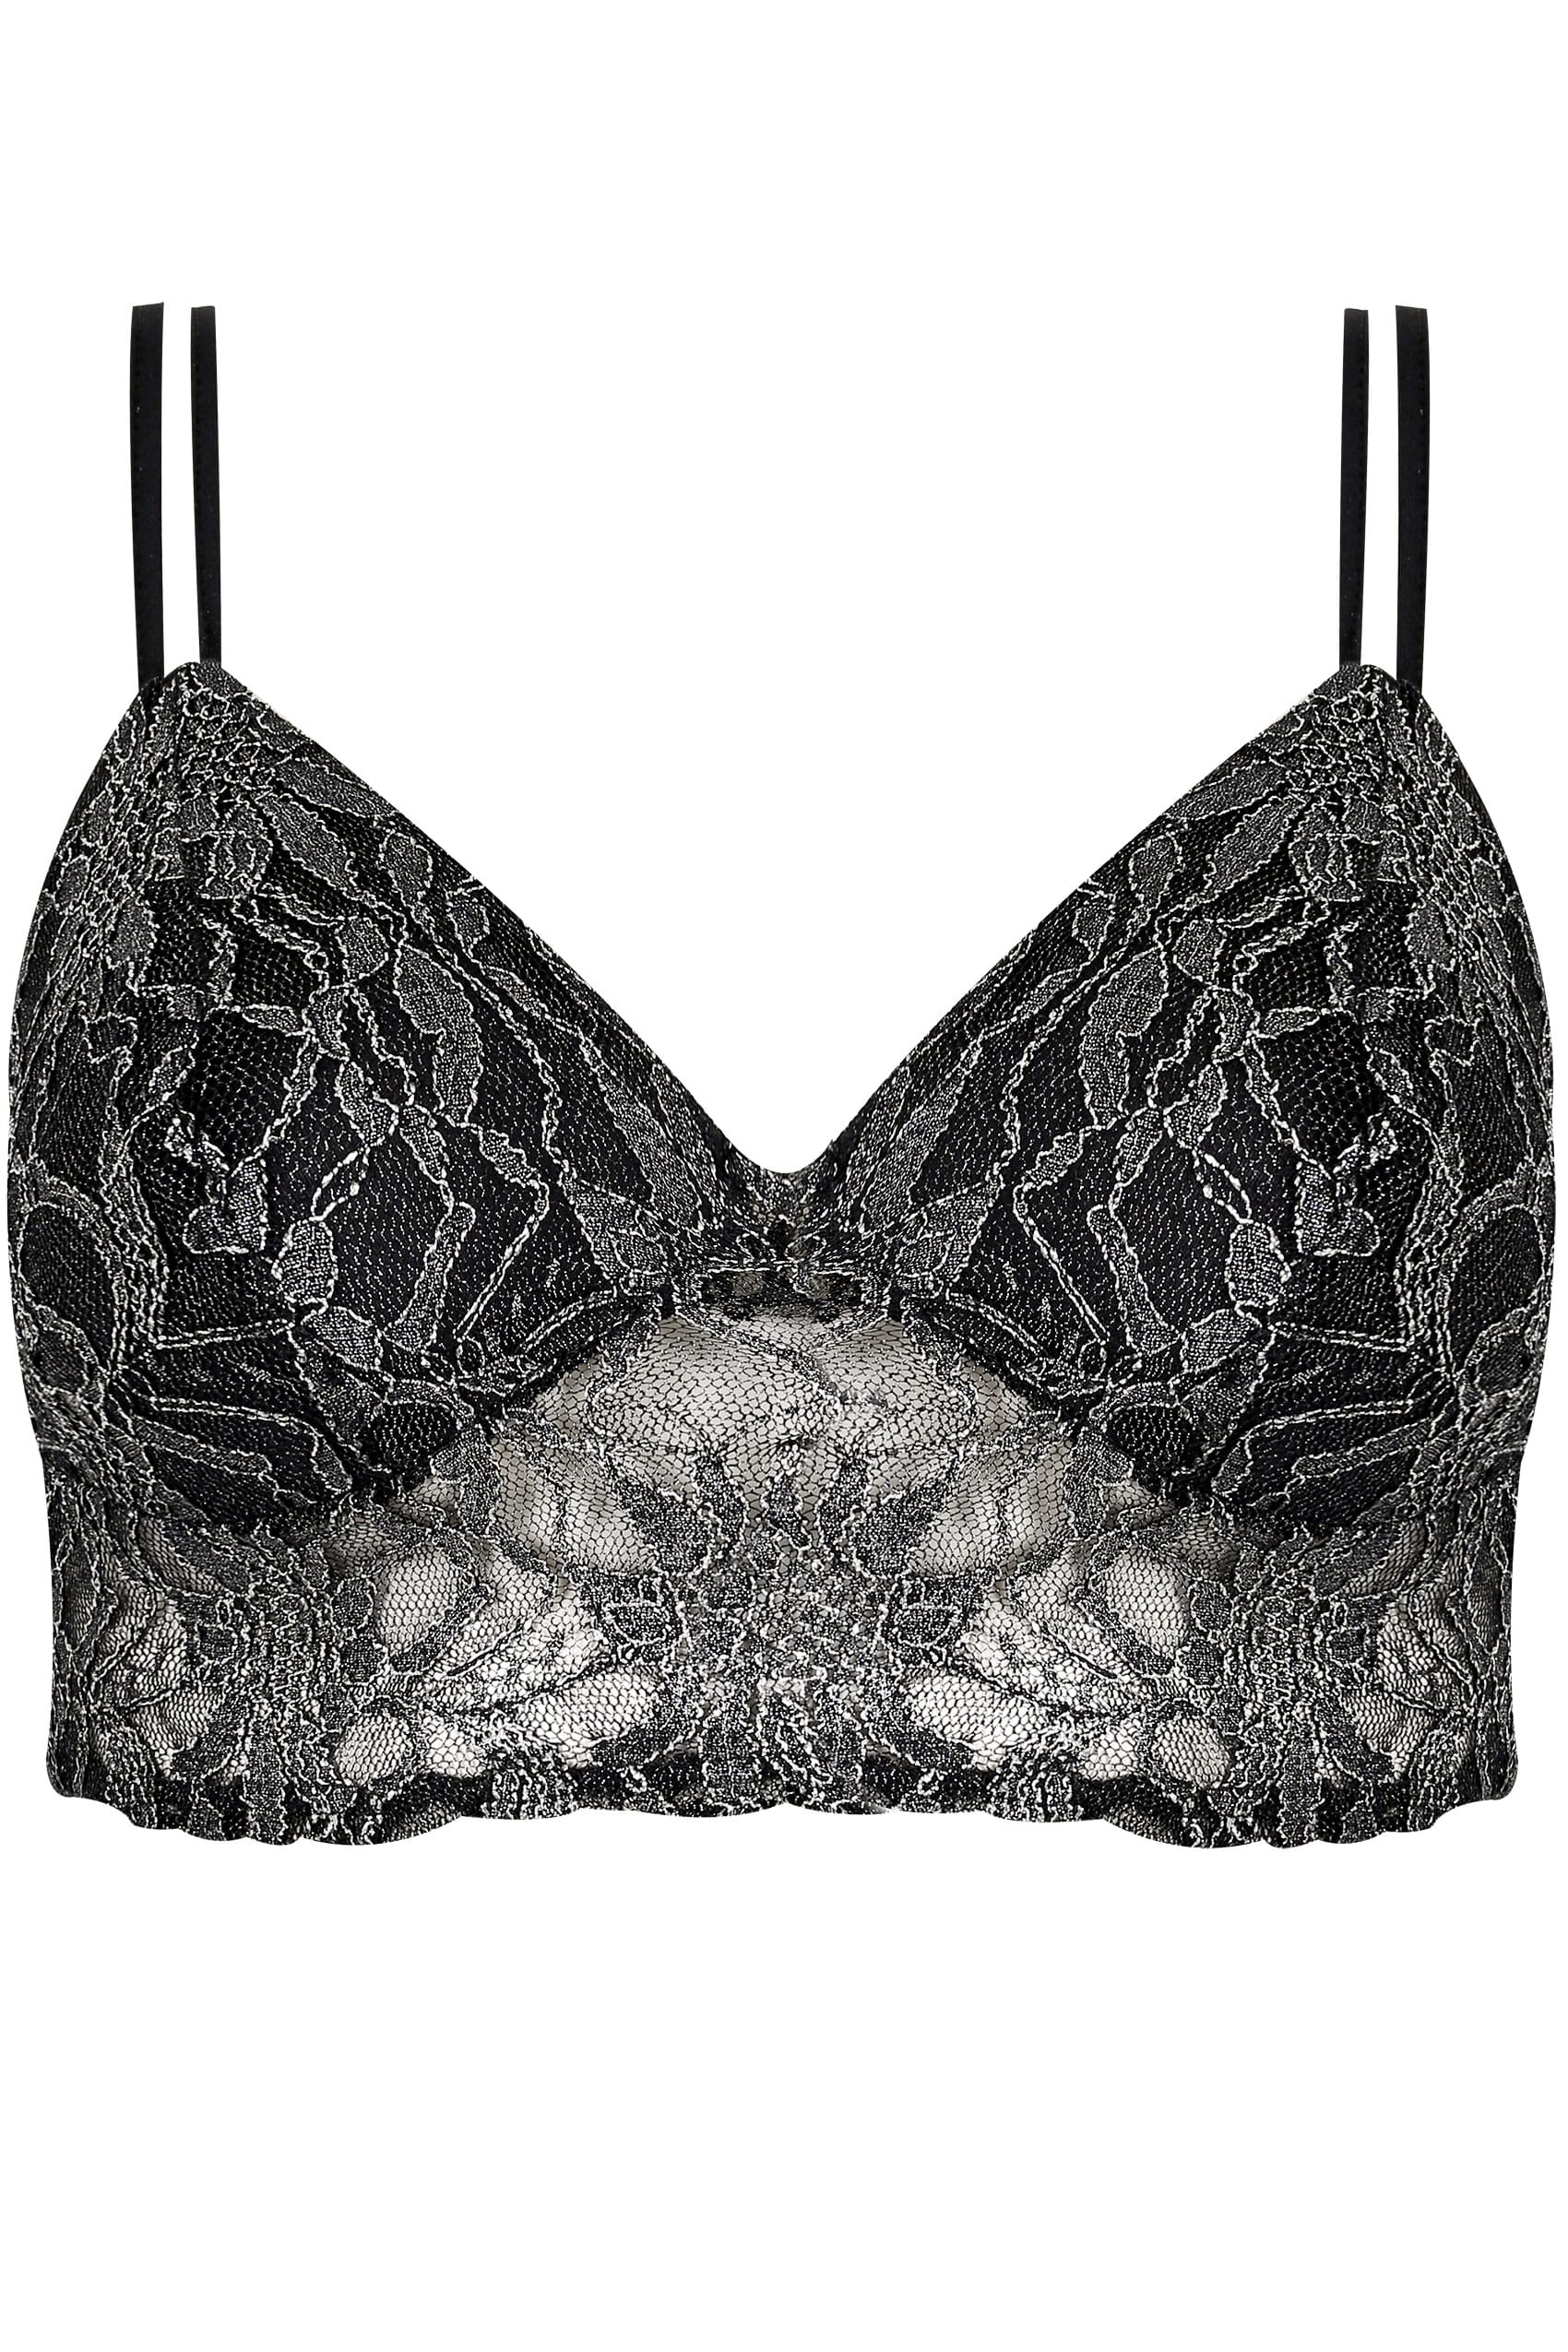 LIMITED COLLECTION Black Metallic Floral Lace Bralette, Plus size 16 to 36